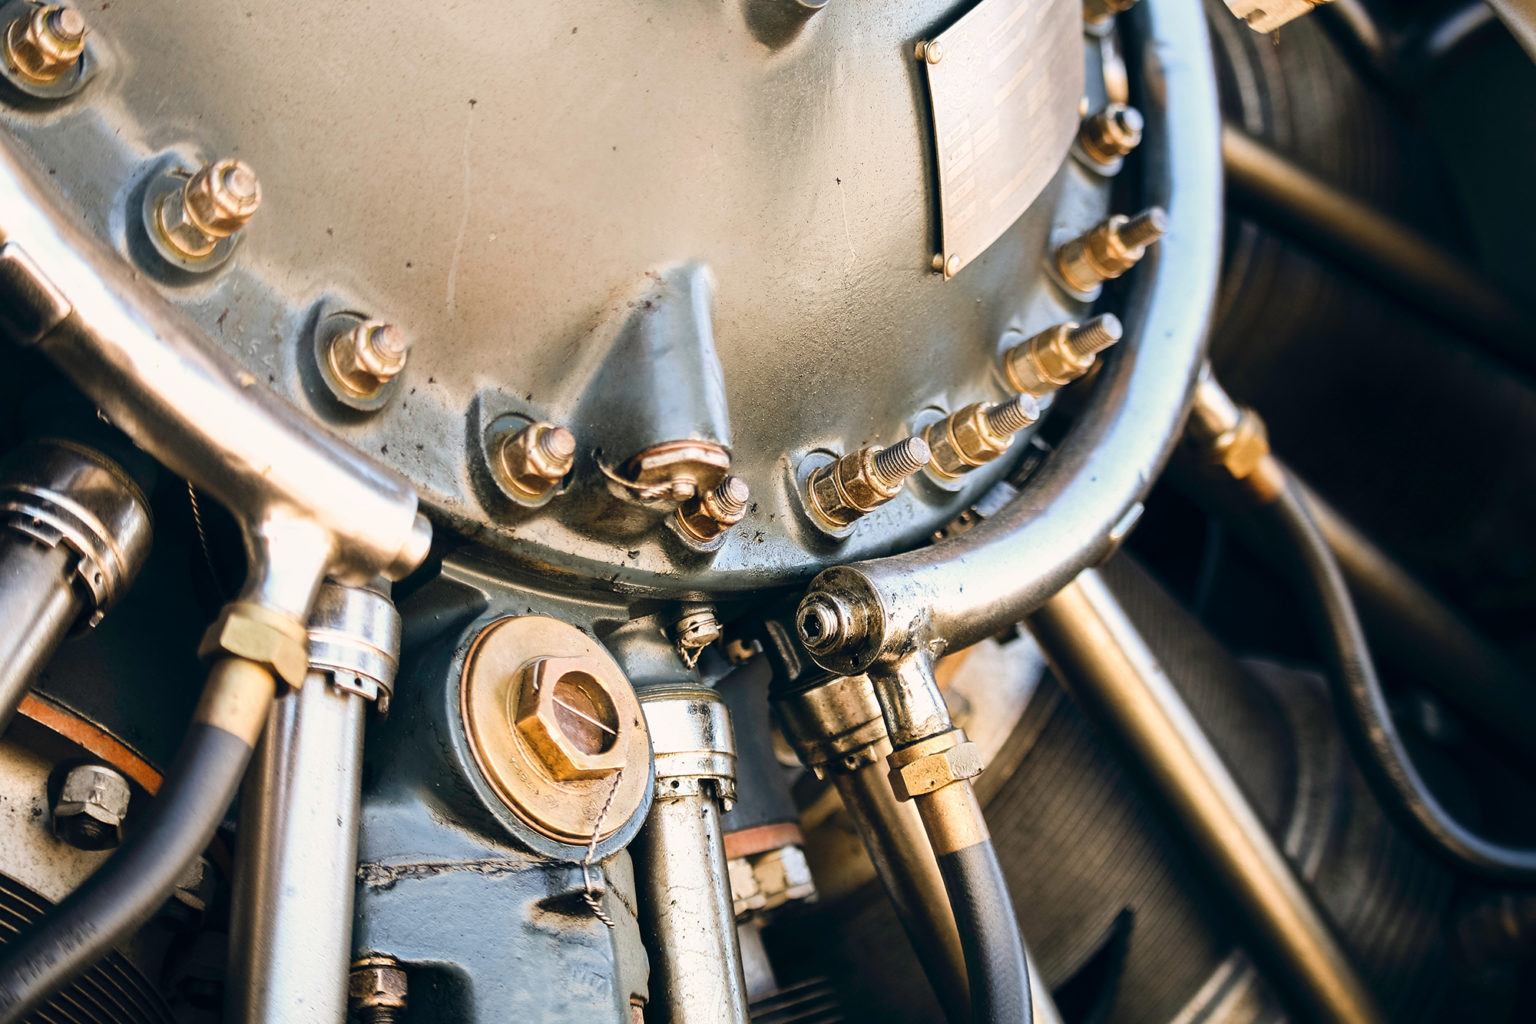 Close-up image of an aeroplane engine. Photo by Aaron Barnaby on Unsplash.